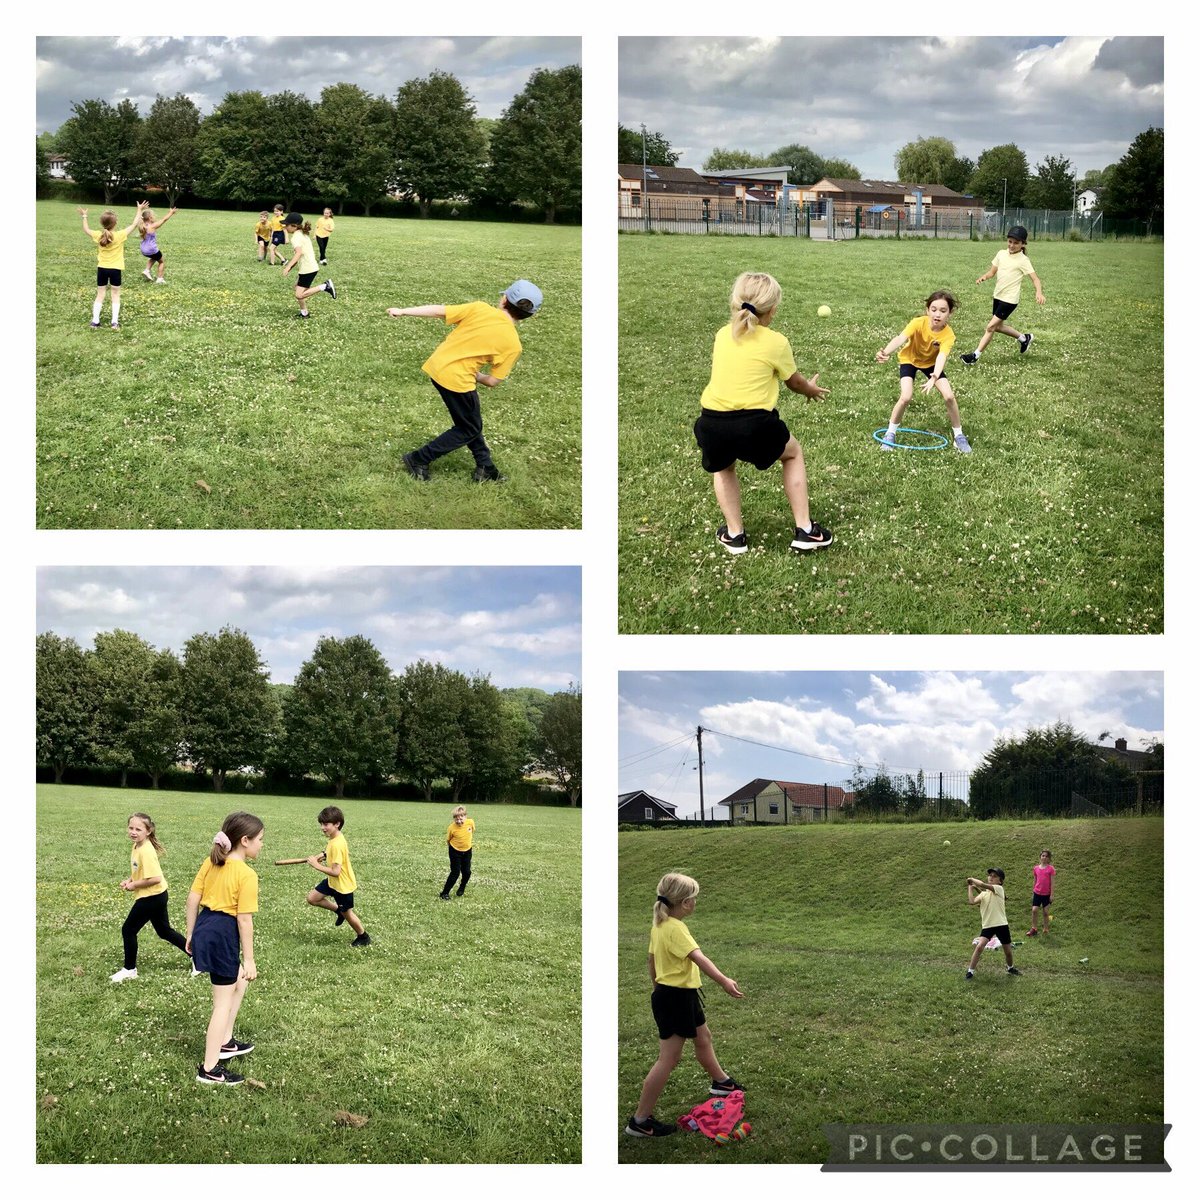 Year 3 are great sports! ⭐️
We all had so much fun playing rounders! 😃 Roll on next week! 🤩
#greatskills 💪🏼
#loveanactionshot 👍🏼